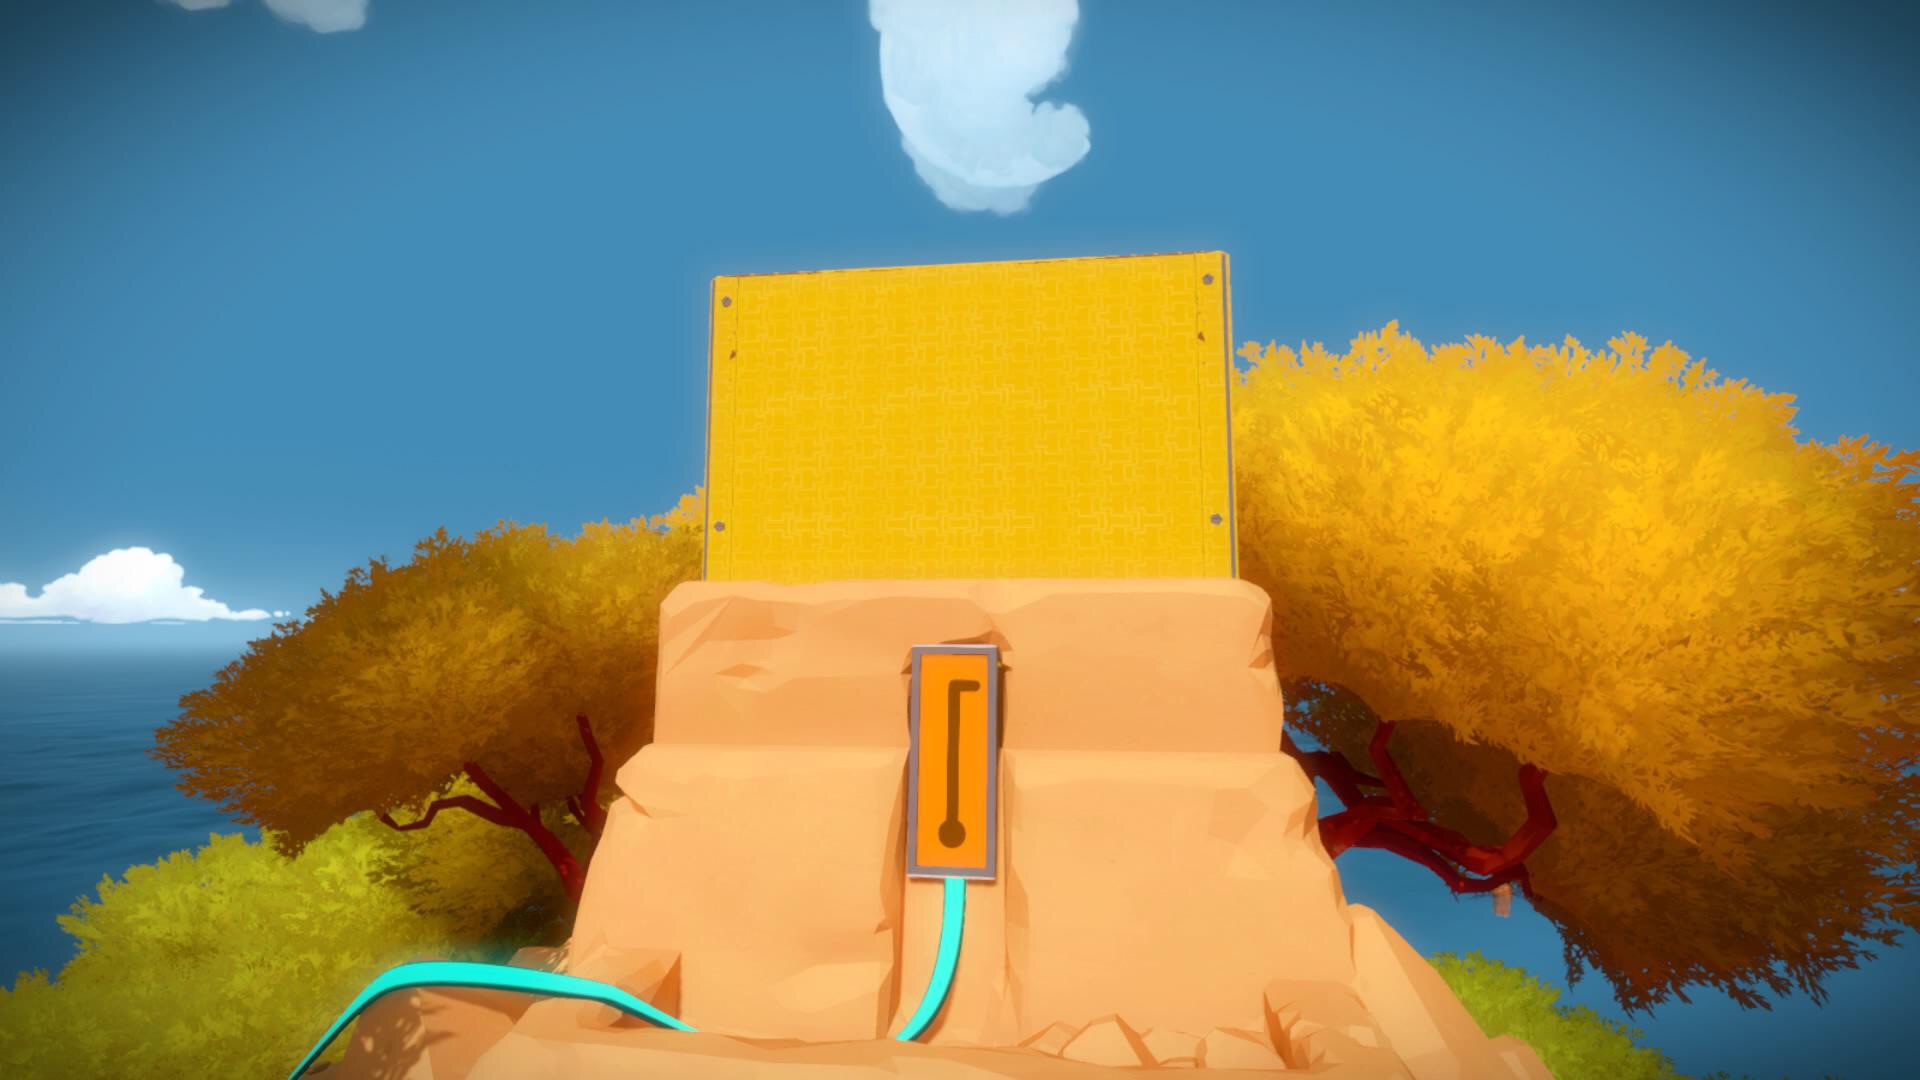 Ps4 The Witness クリア後の評価 感想と解説 ゆるスナ